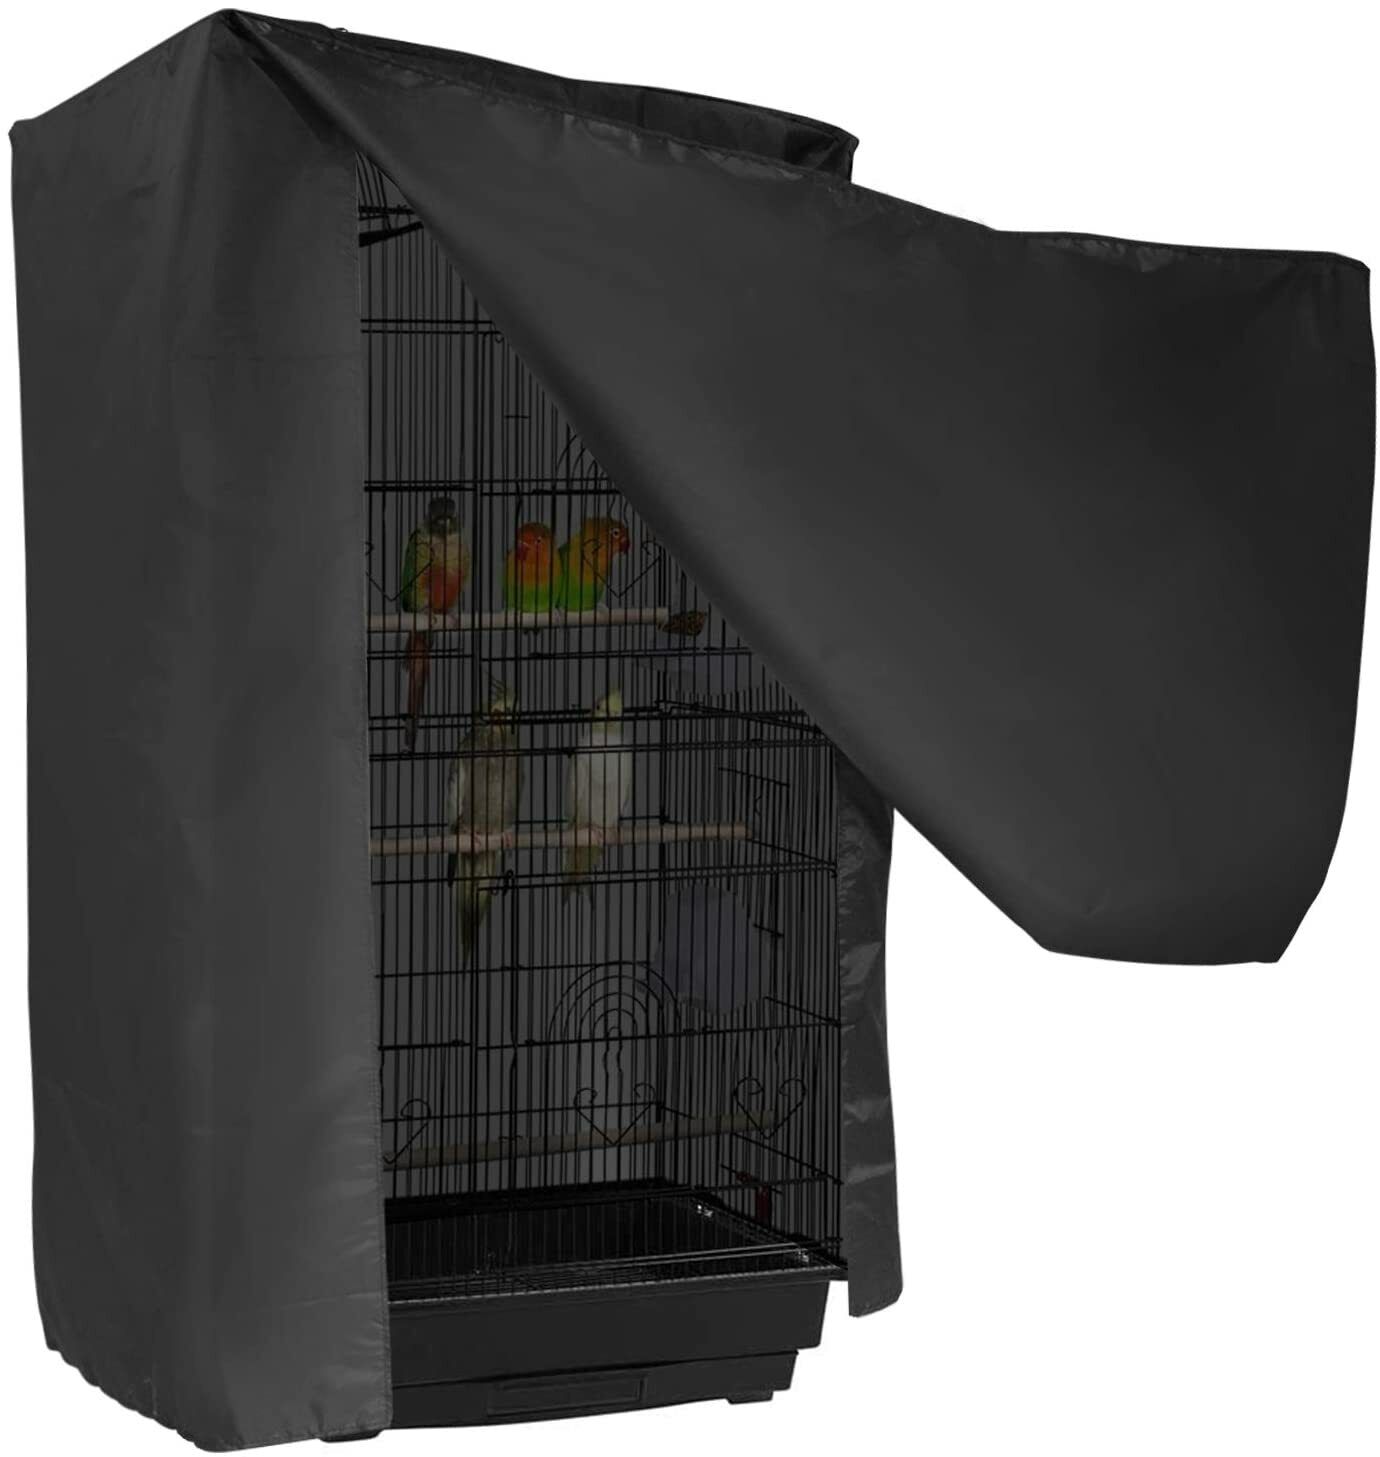 Universal Removable Max 56% OFF Bird Cage Cover Breathable Shi Light New Orleans Mall Privacy